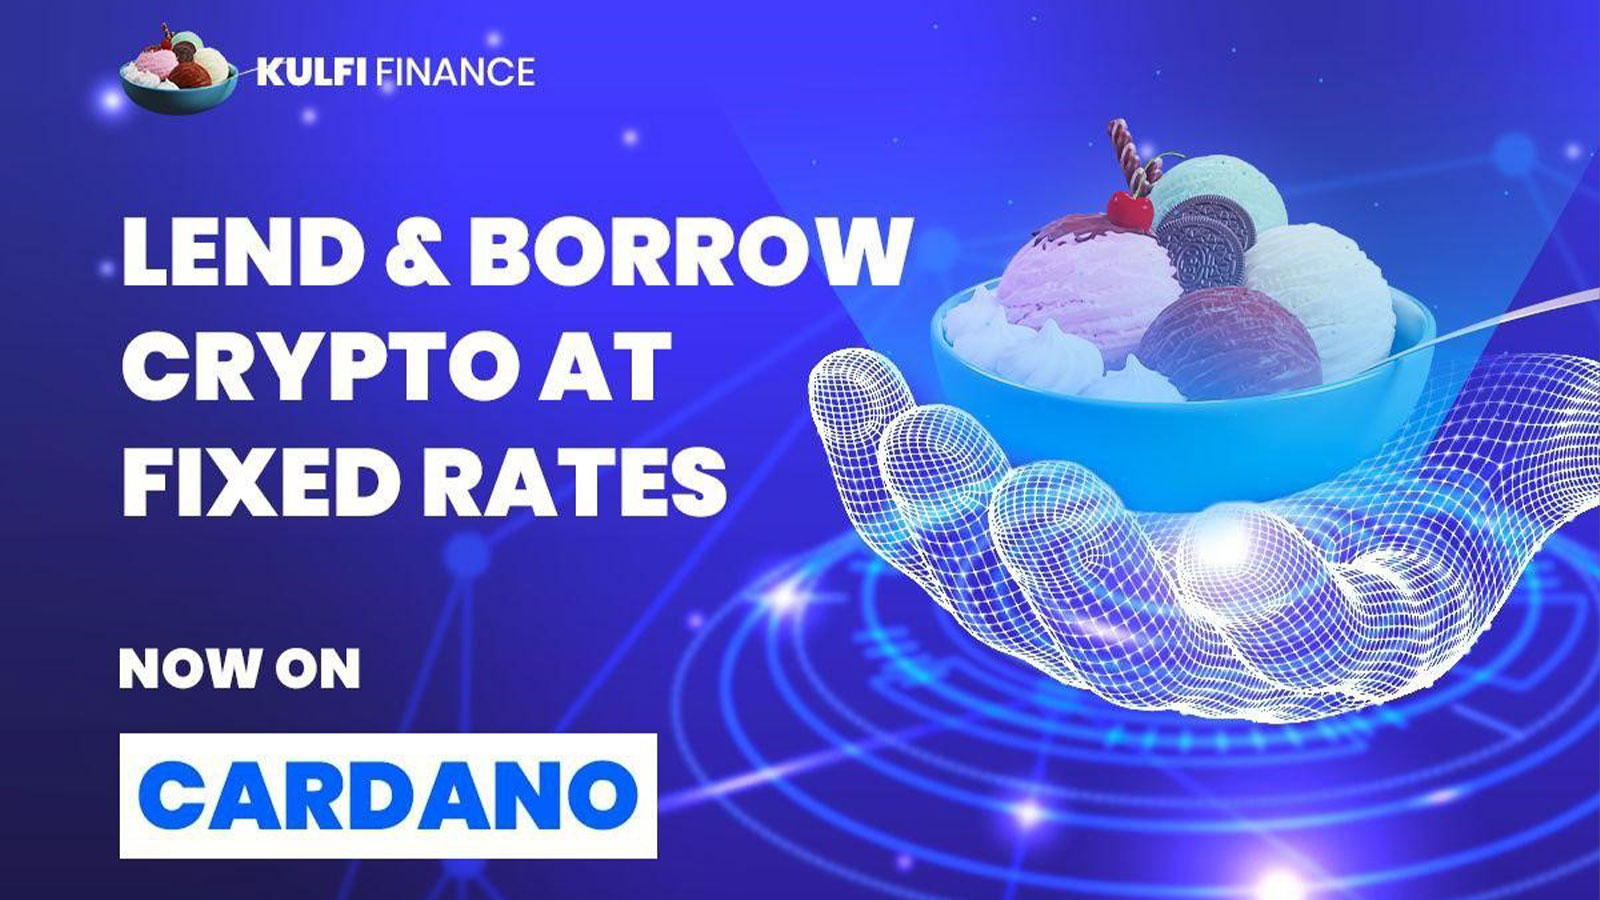 Kulfi Finance Fixed Rate Lending Protocol to Bring Certainty to Cardano DEFI Space